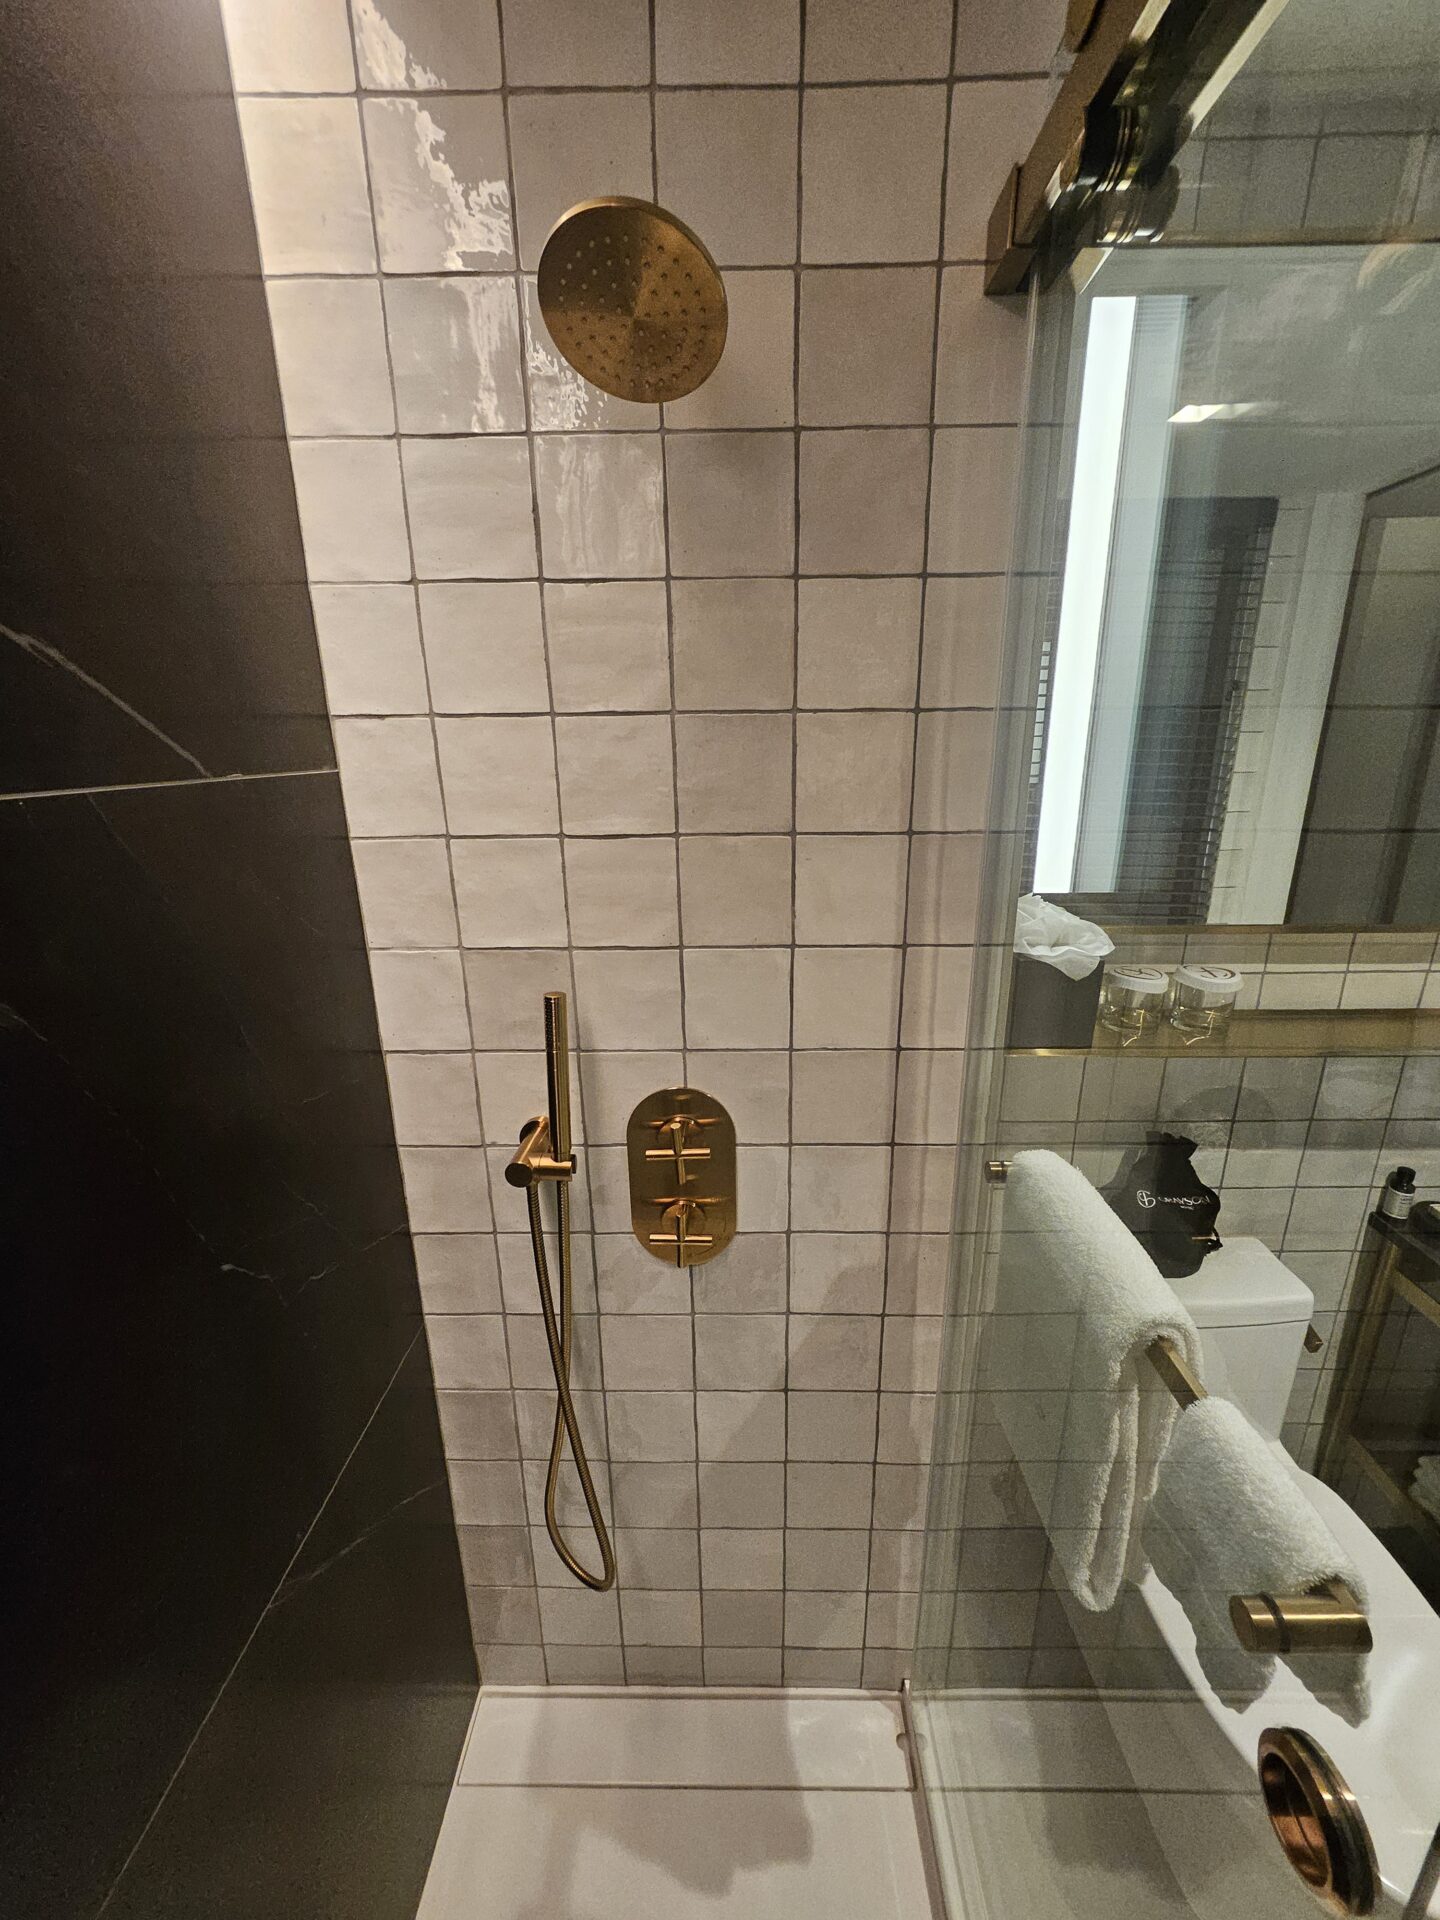 a shower with a gold faucet and a white towel on a rack